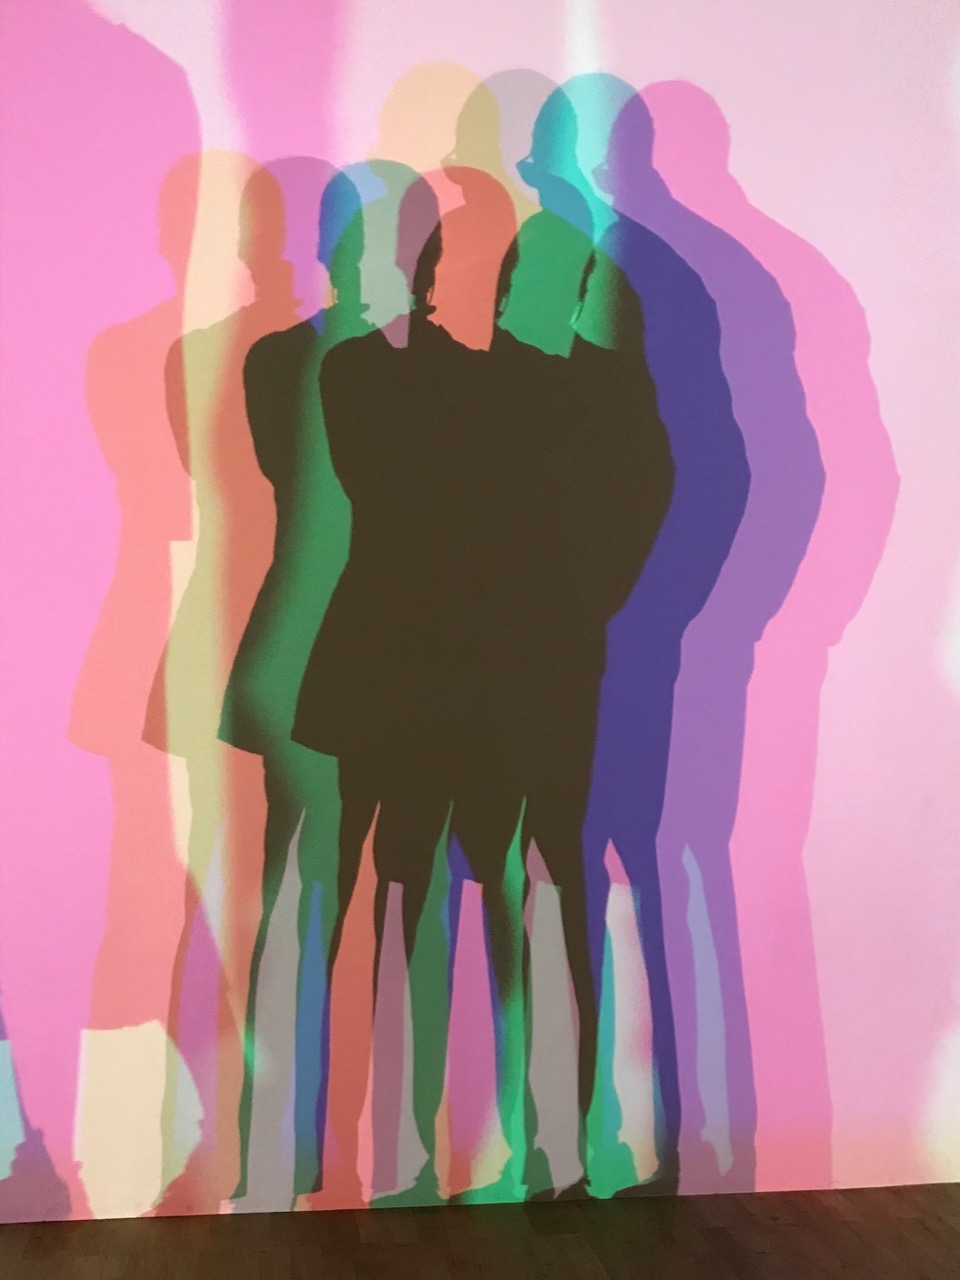 Lee and Melinda Varian in Olafur Eliasson's 'Your Uncertain Shadow', November 13, 2019